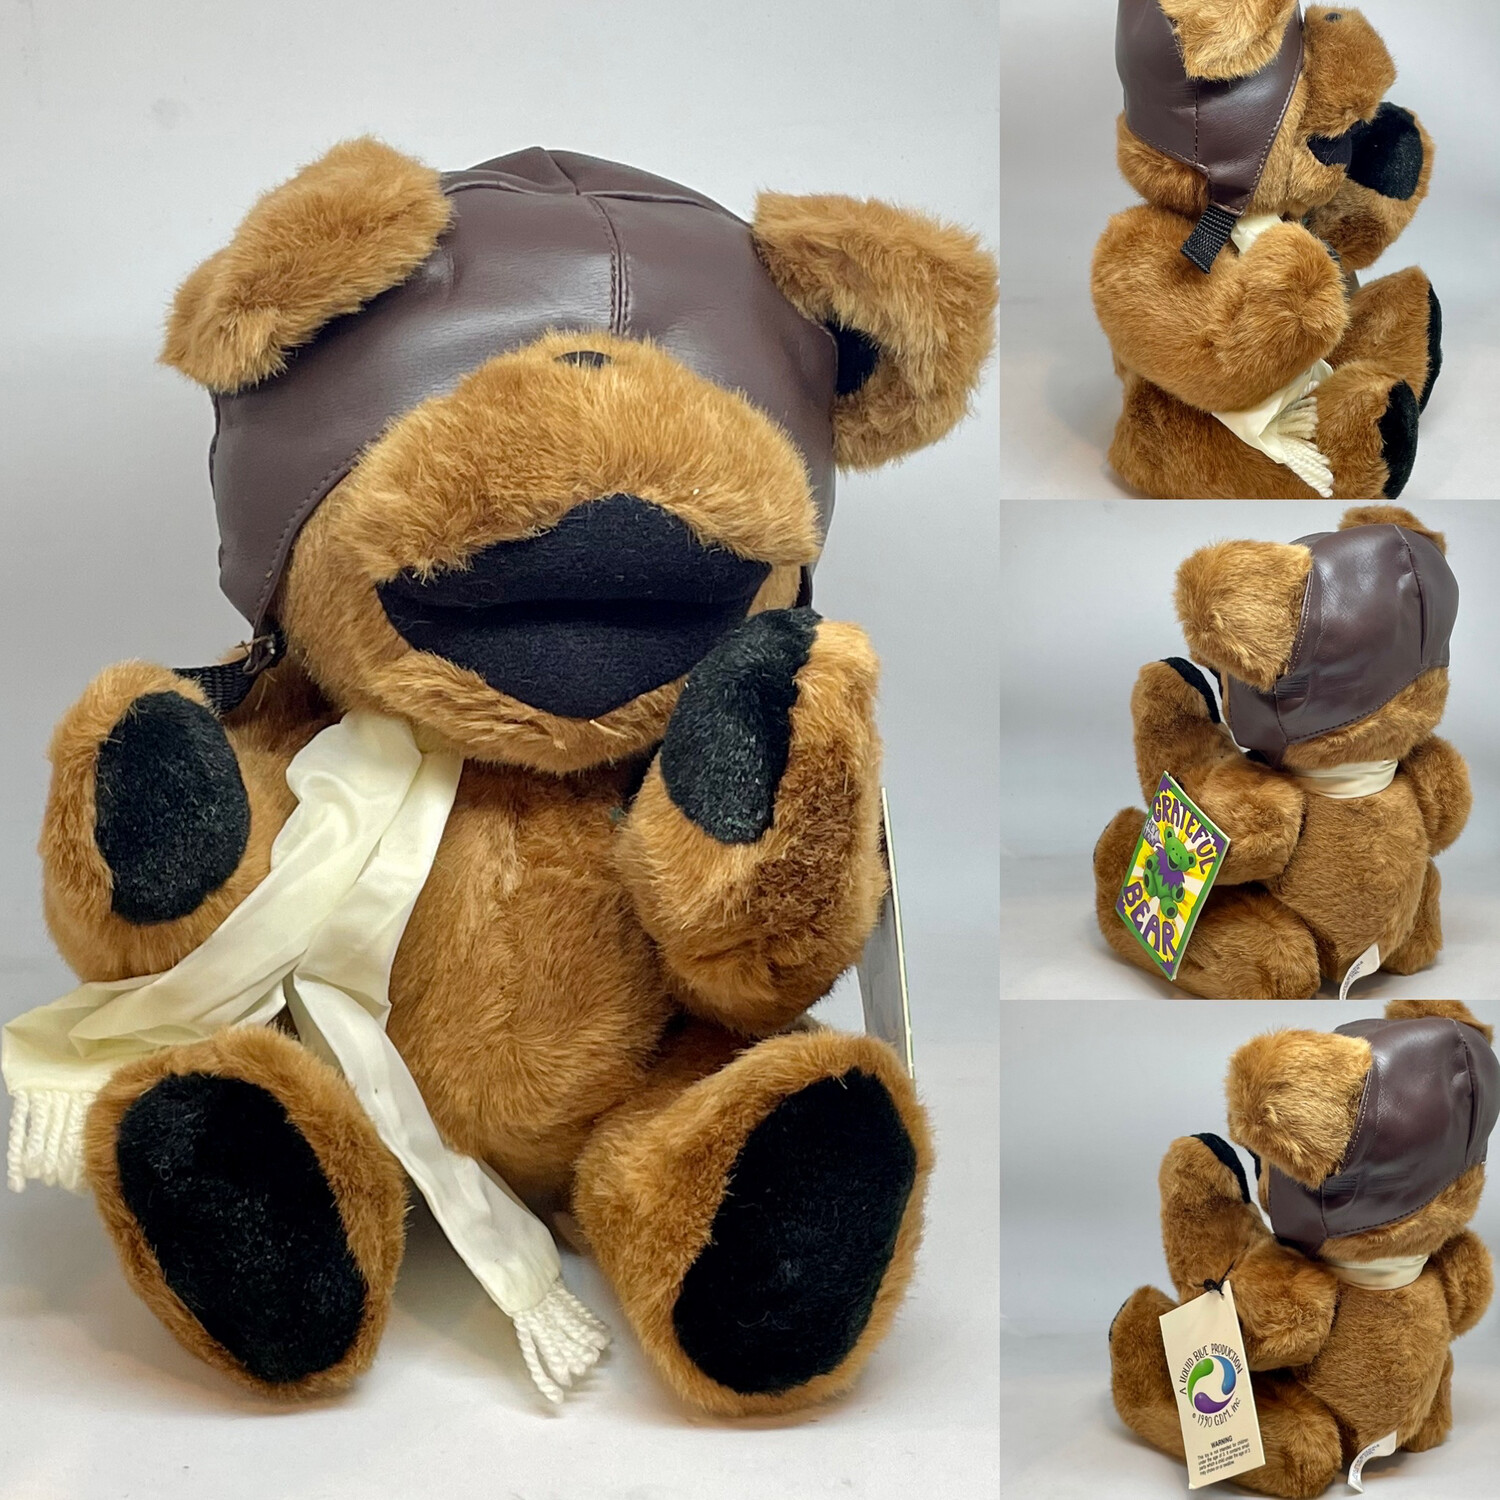 Vintage 1990 Grateful Dead Teddy Bear Bomber/Bombardier With Articulating Limbs. New with Intact Tags